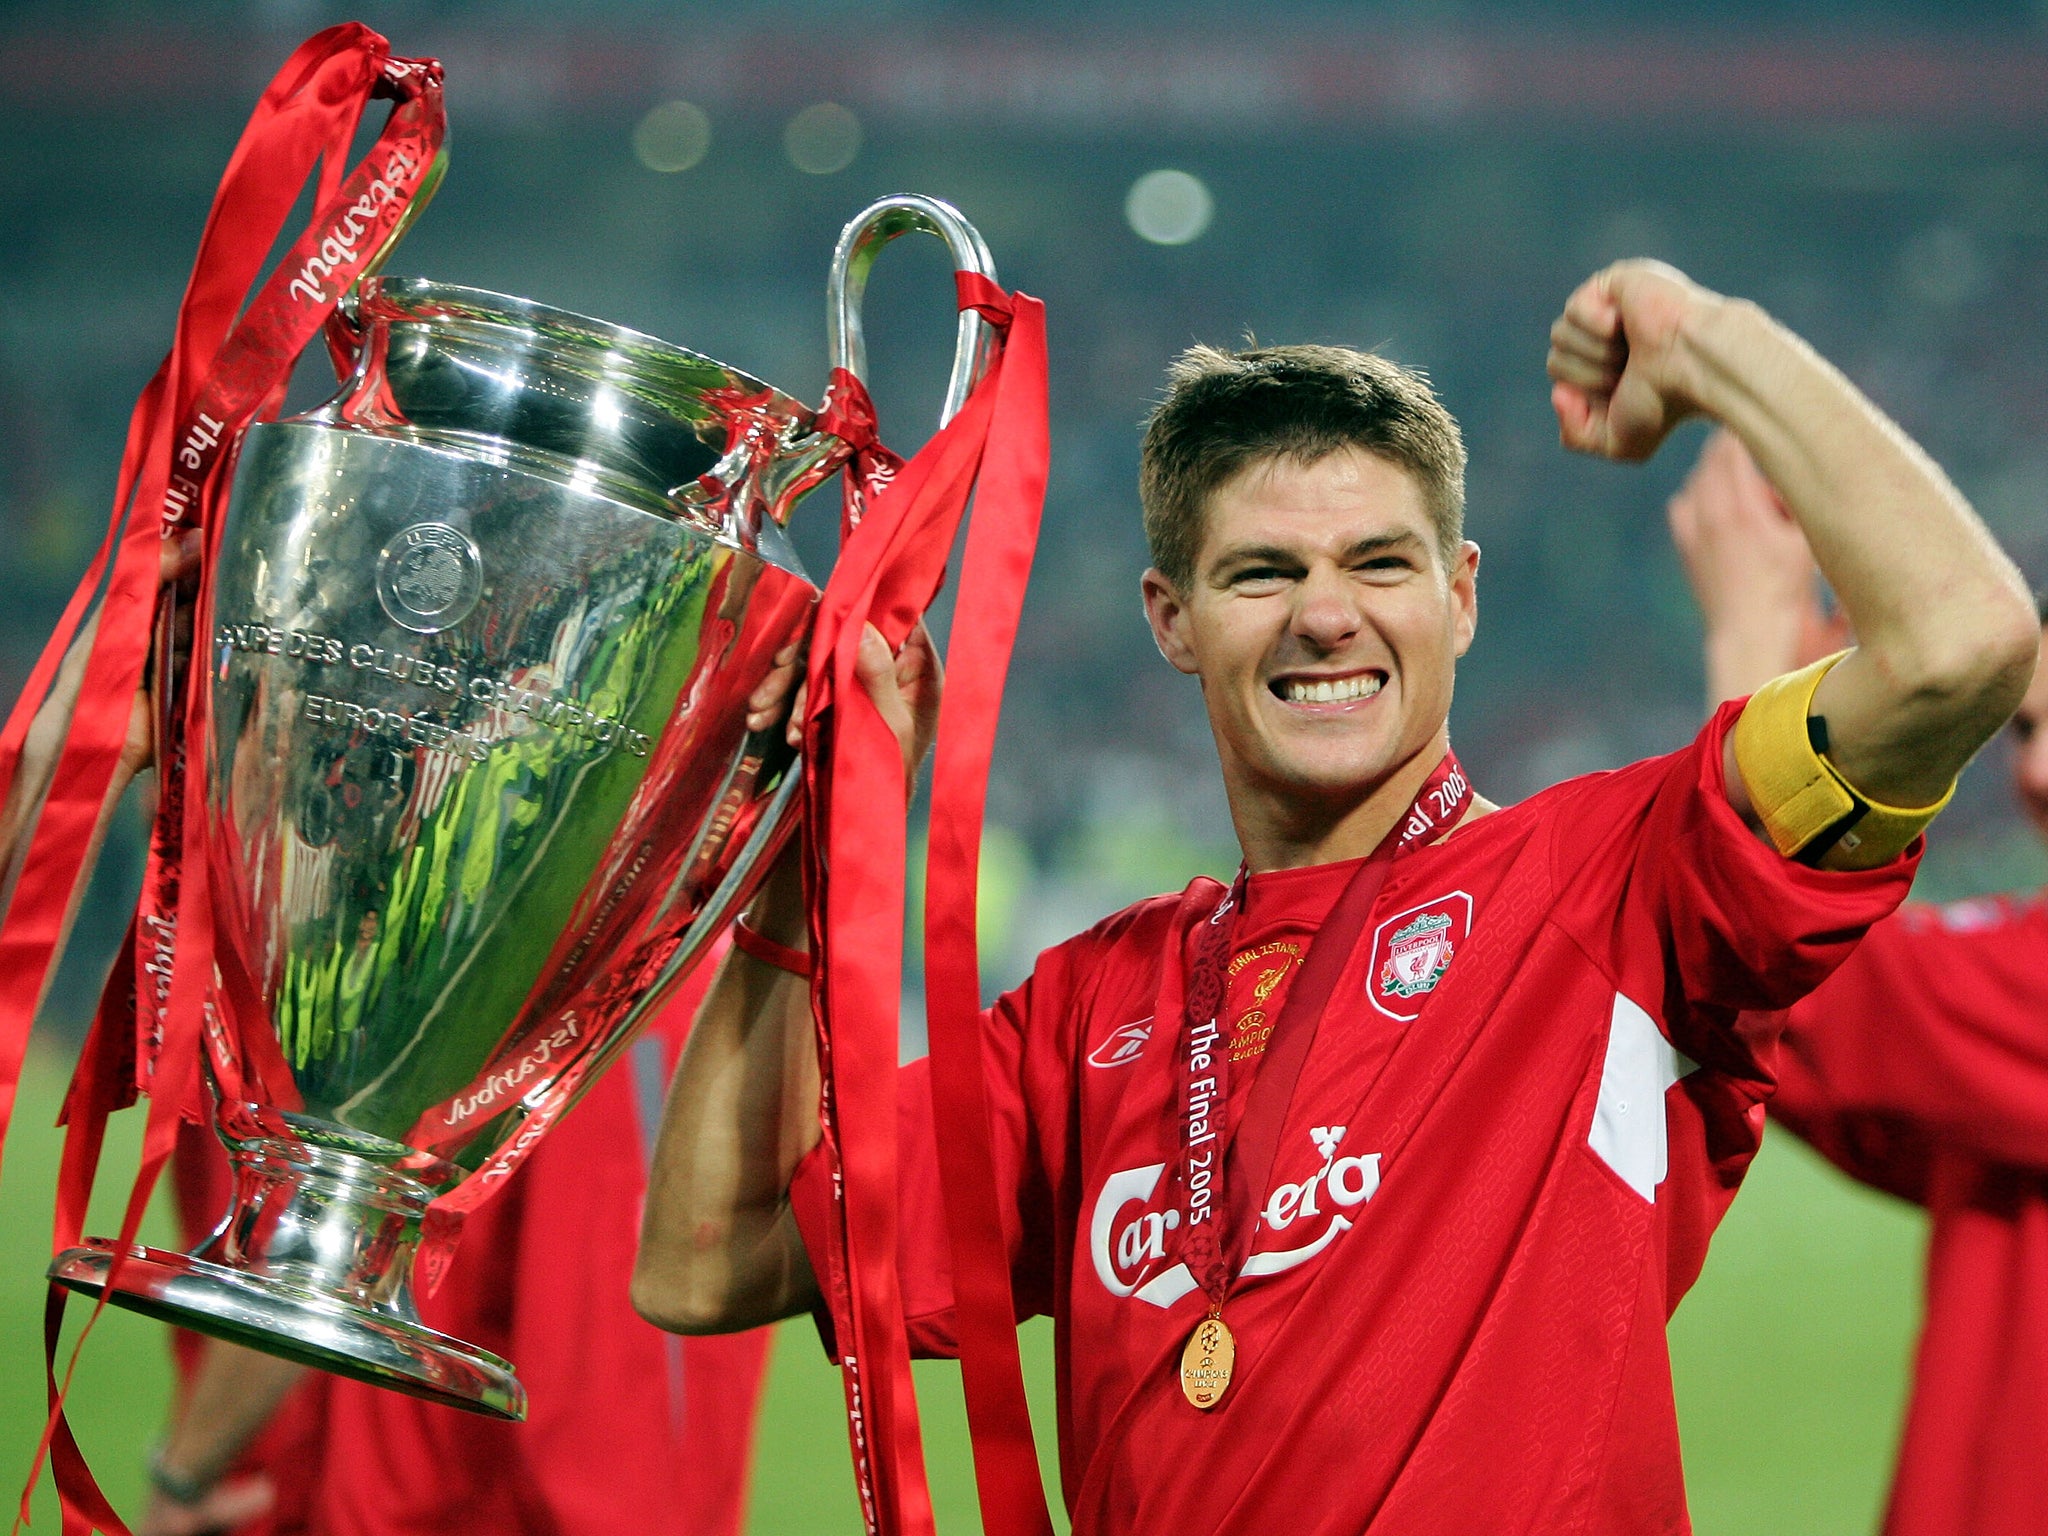 Steven Gerrard captained Liverpool to their European Cup victory in 2005 (Getty)